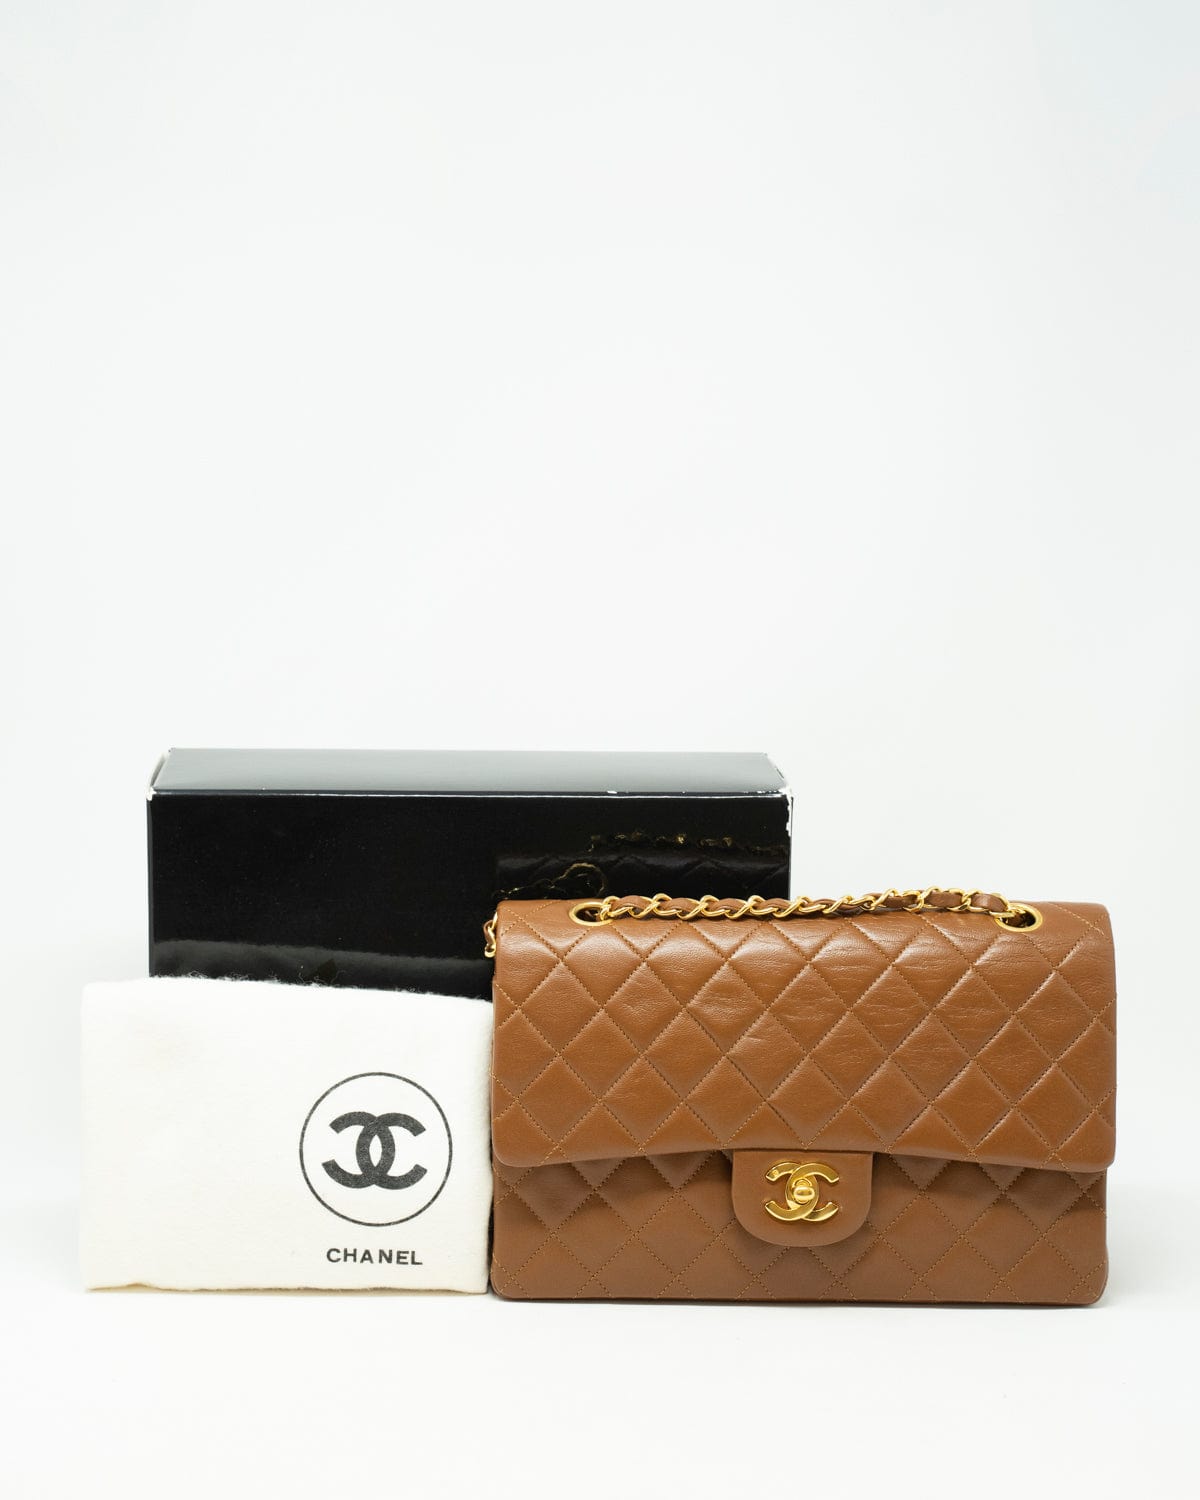 Chanel Chanel medium classic flap in caramel with 24k gold gilded hardware. ASL3390